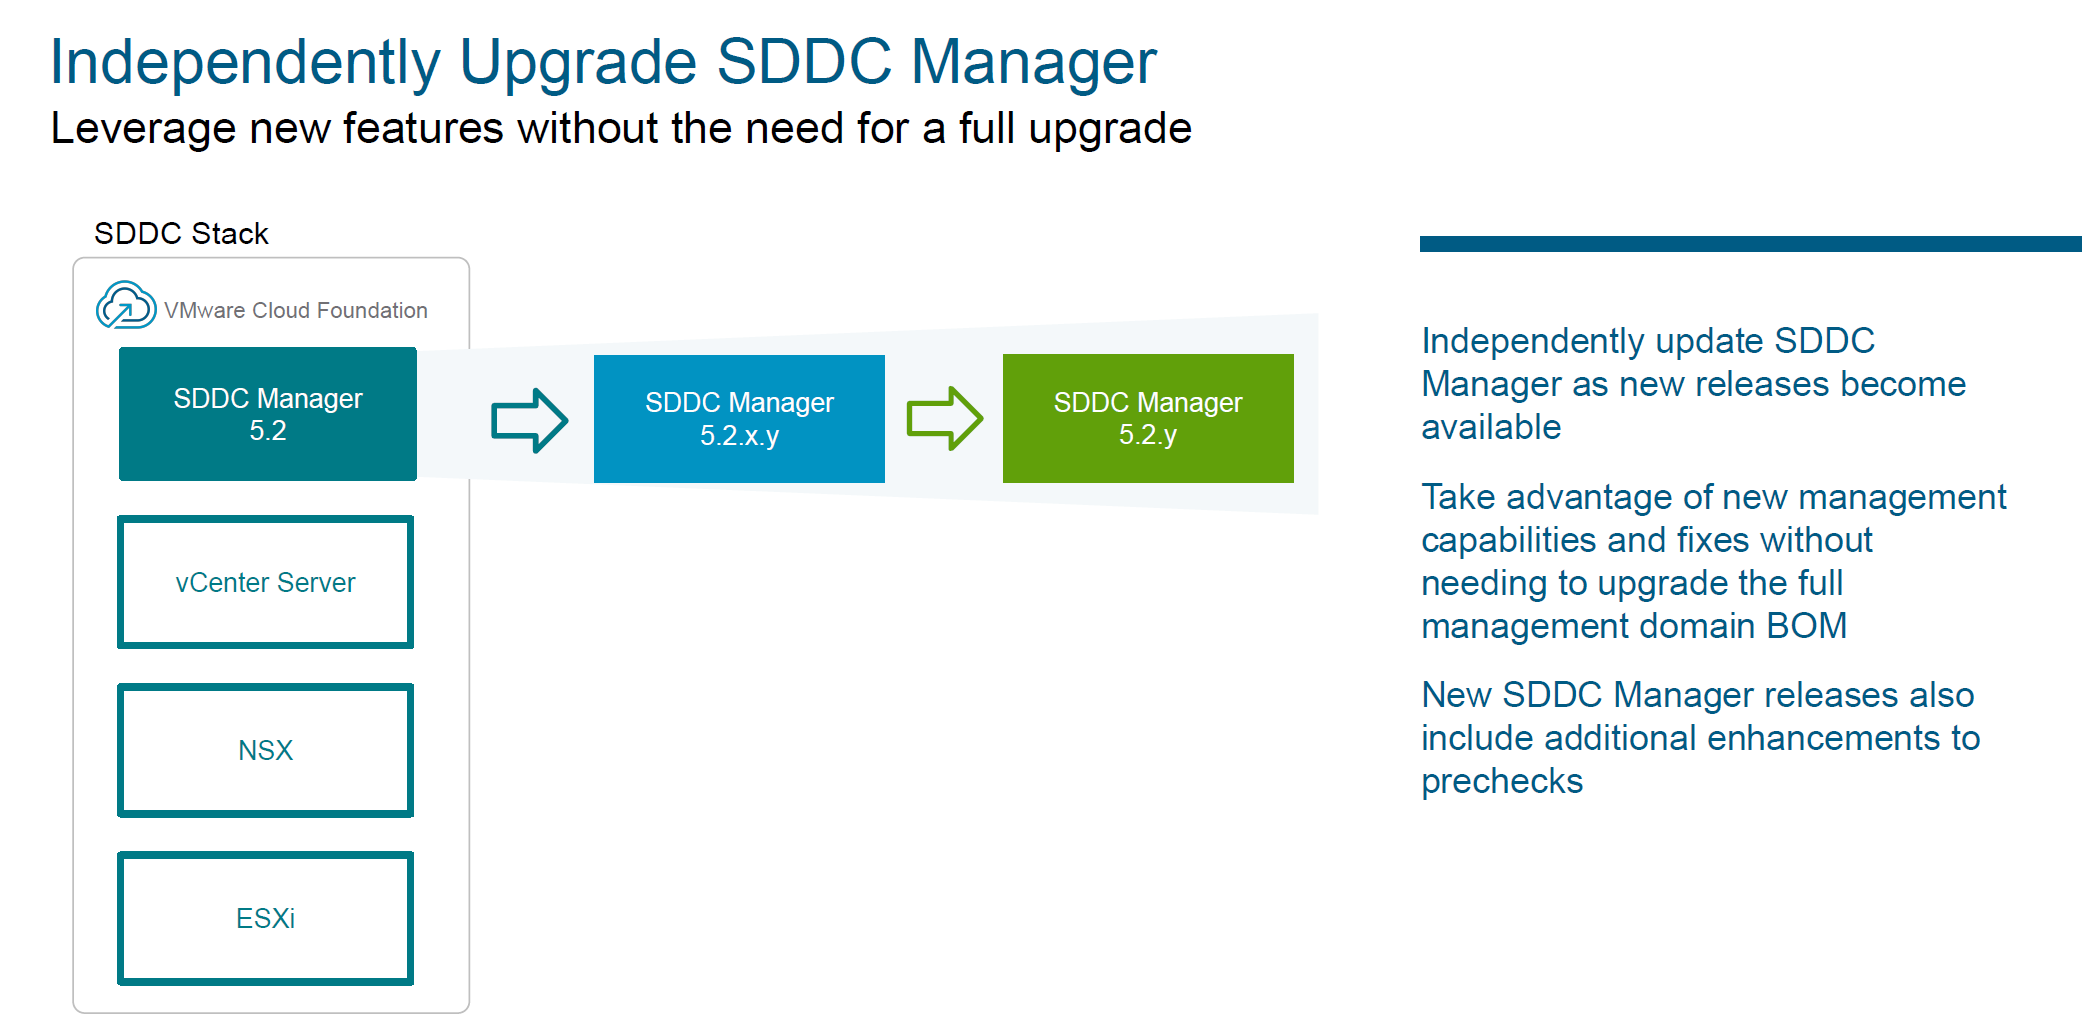 What's New in VMware SDDC Manager (VCF 5.2)